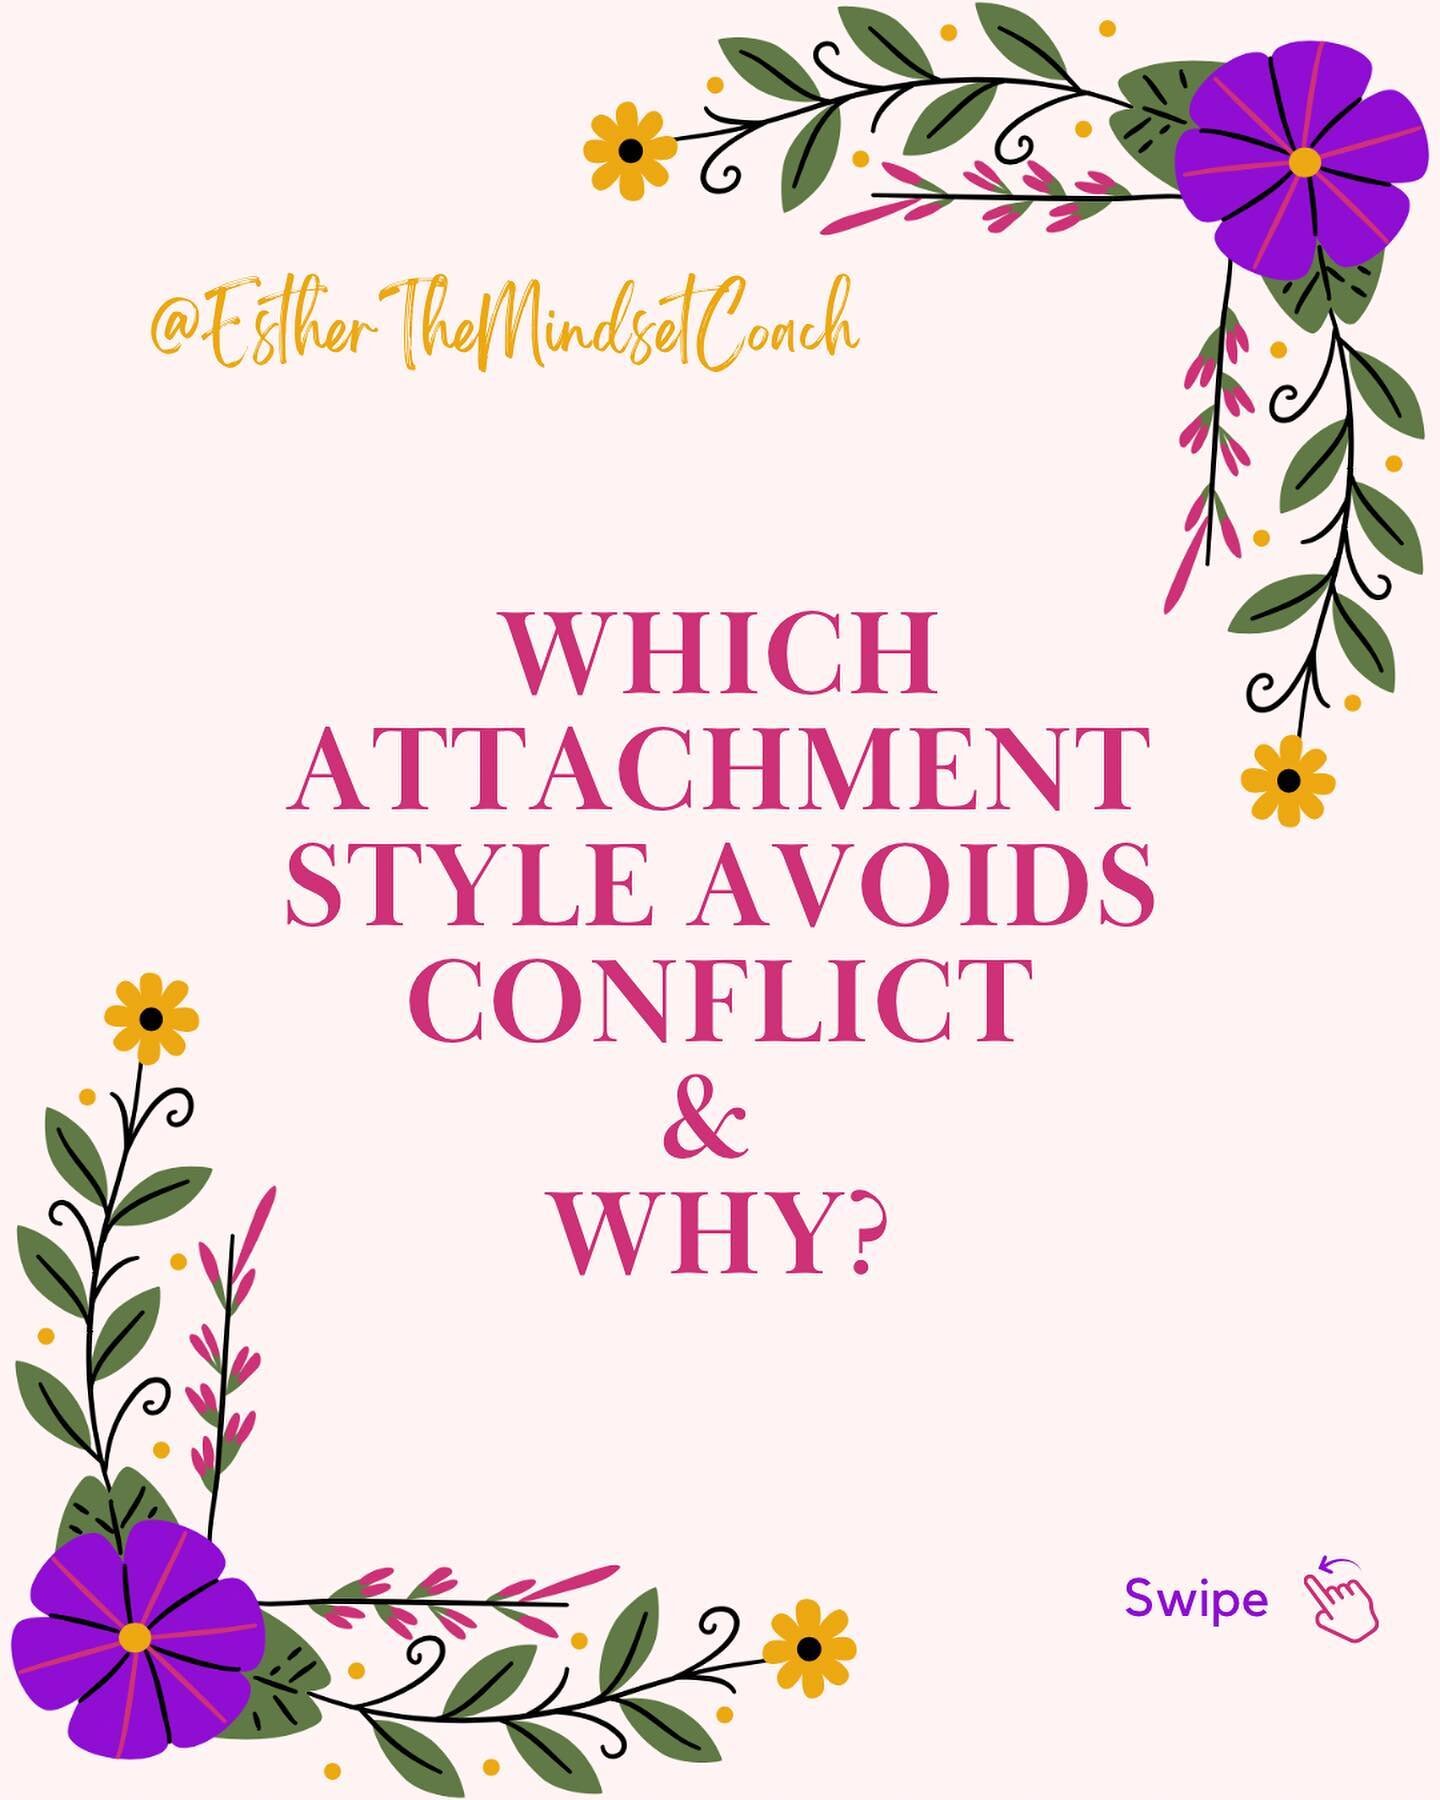 Do you or your partner avoid dealing with conflict? This may be the reason why.

If you&rsquo;re ready to start healing your attachment issues and want to learn how to attach to someone in a healthy manner, book a 1:1 intro session with me at www.Est